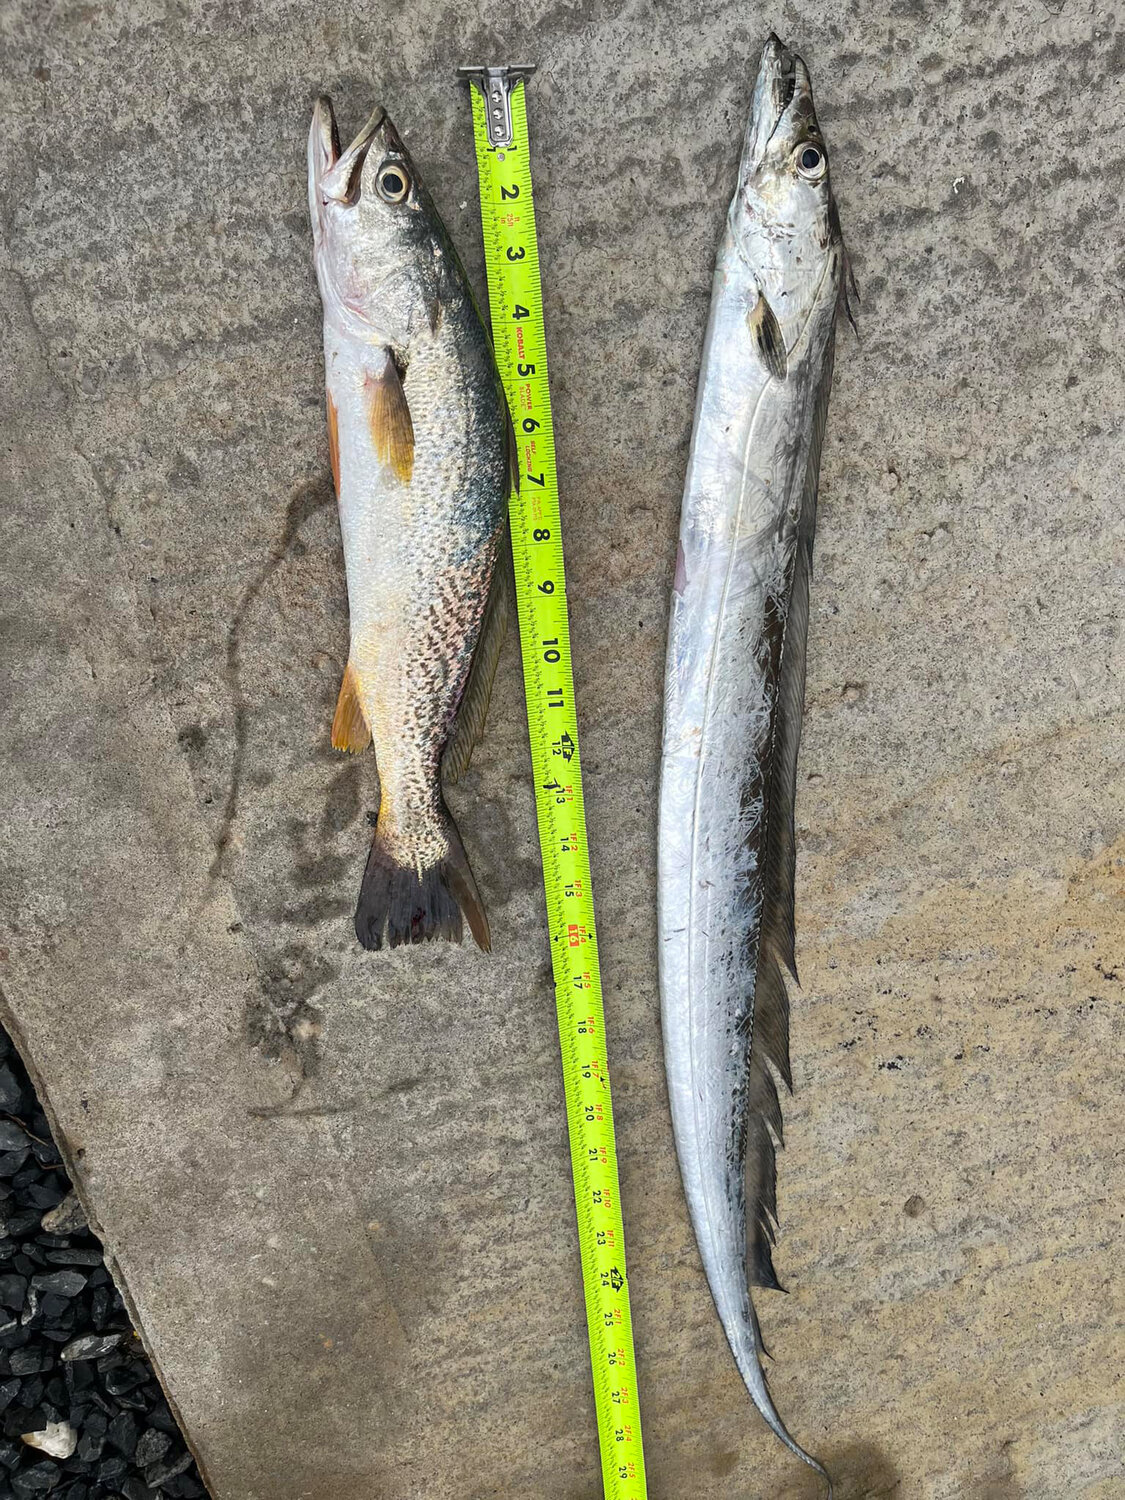 Bowers Bayside Bait and tackle reported ribbonfish and weakies being caught from shore at Bowers Beach.